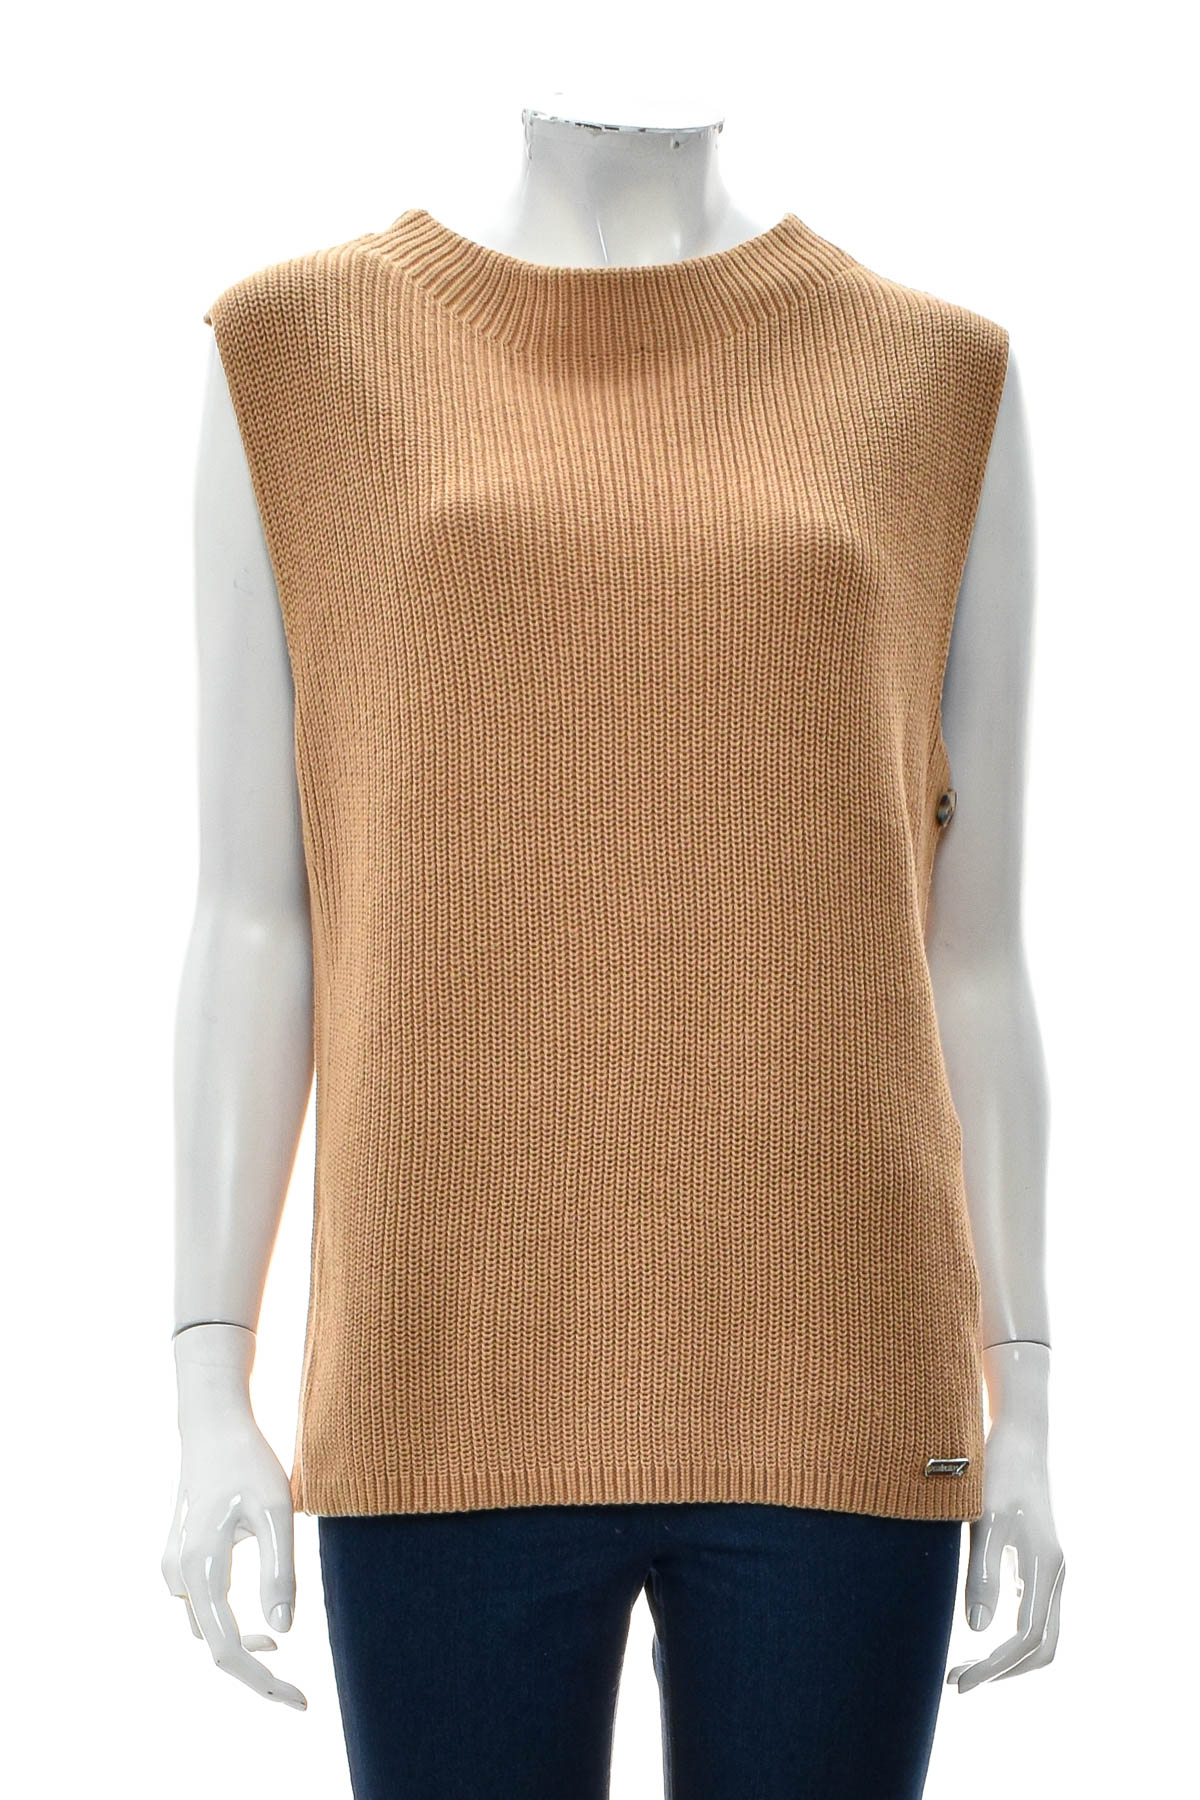 Women's sweater - Collection L - 0